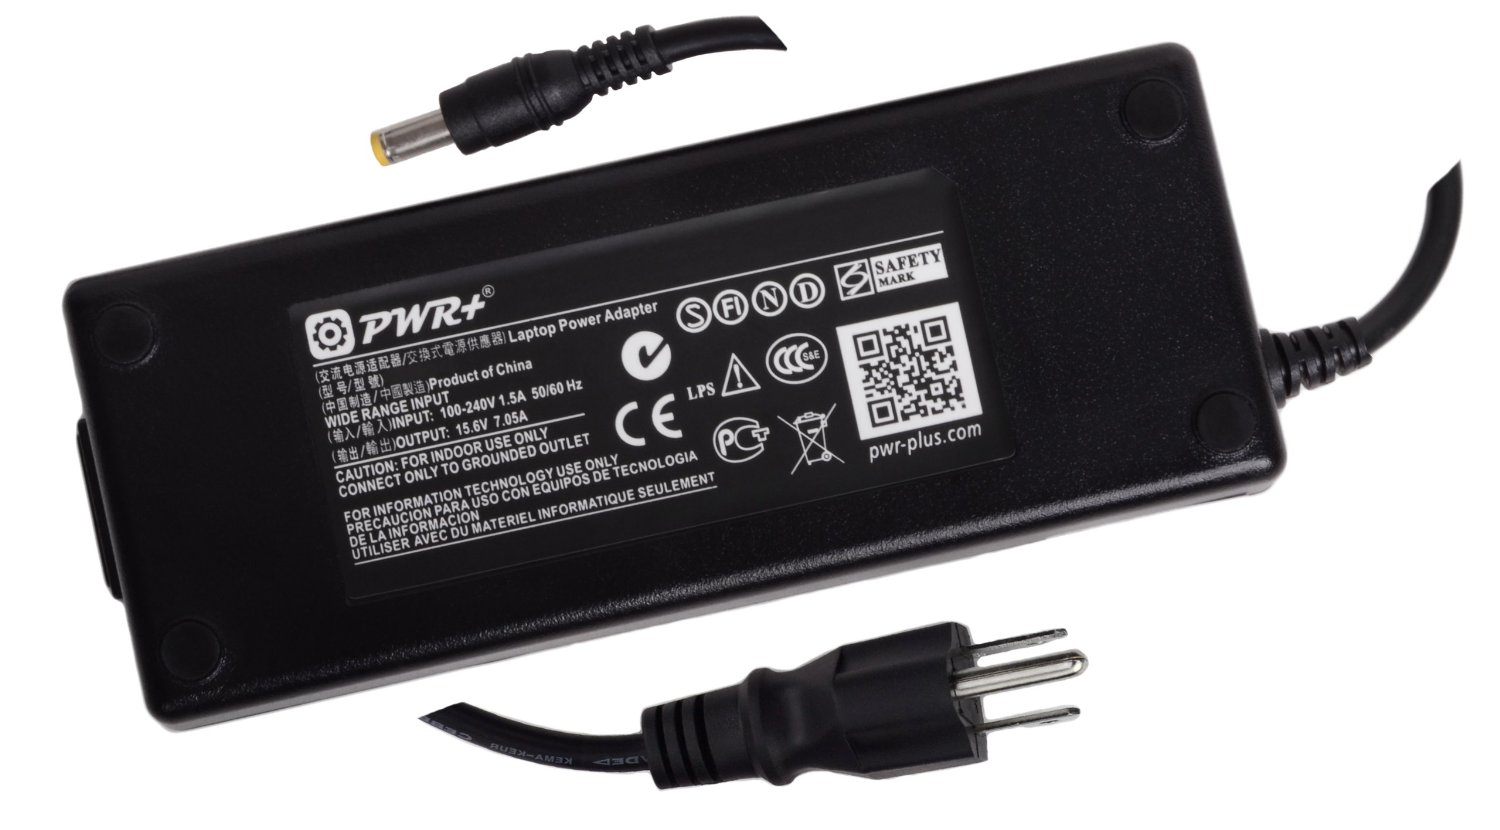 Genérico Pwr+® 12 Ft 120w AC Adapter Laptop Charger for Panasonic Toughbook 52 53 74 31 C1 F9 S10 19 ; H1 Field, Health ; H2 ; U1 Essential, Ultra ; CF-19A CF-19AHUAX1M; Cf-aa1633am Cf-aa5713am Cf-aa5803am Cf-aa6373am Cf-aa6503am Mil-461f Power Supply Cord